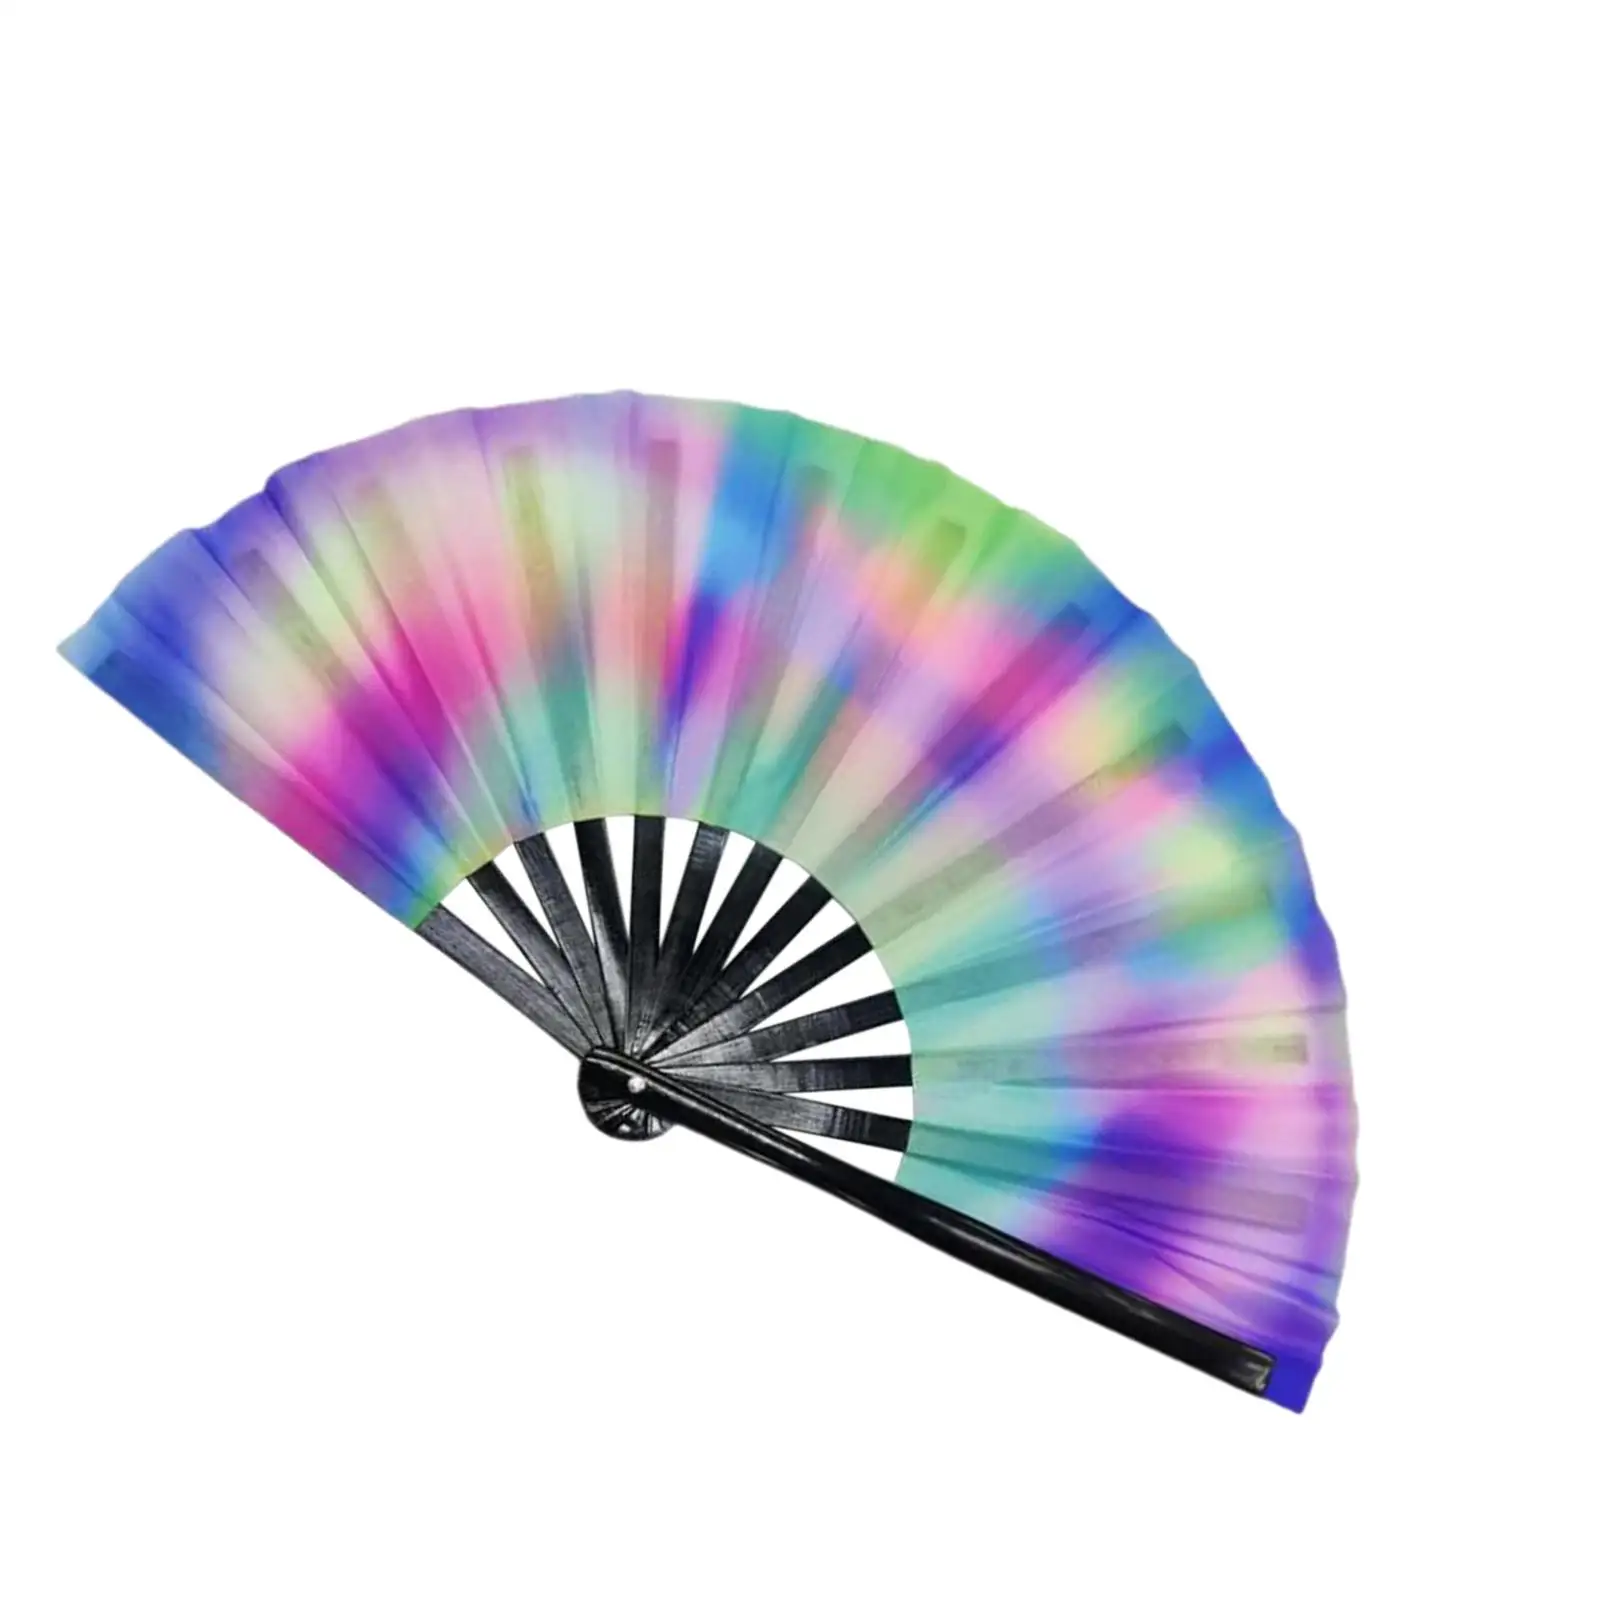 Large Rave Folding Hand Fan Fluorescent Effects Chinese Kung Fu for Roles Play Festivals Bars Party Supplies Theater